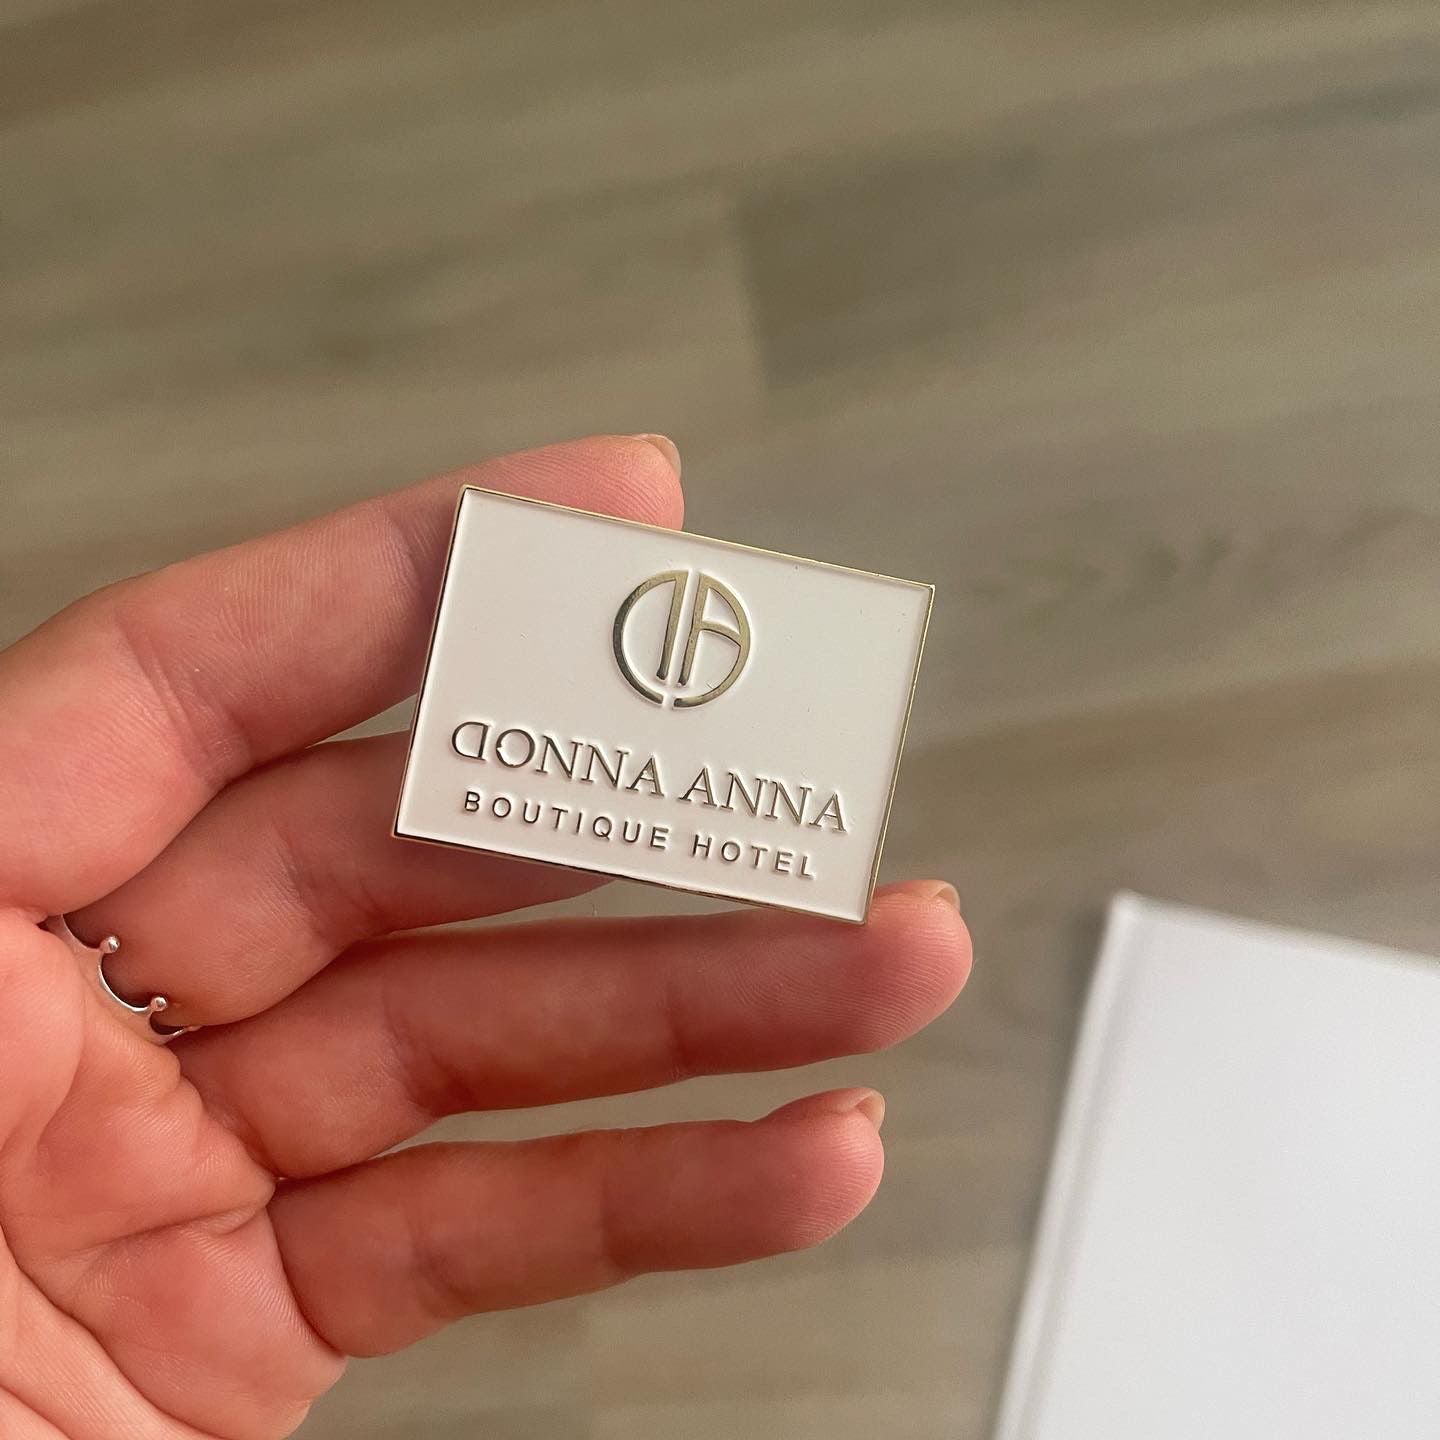 Pins for Donna Anna Boutique Hotel TM.